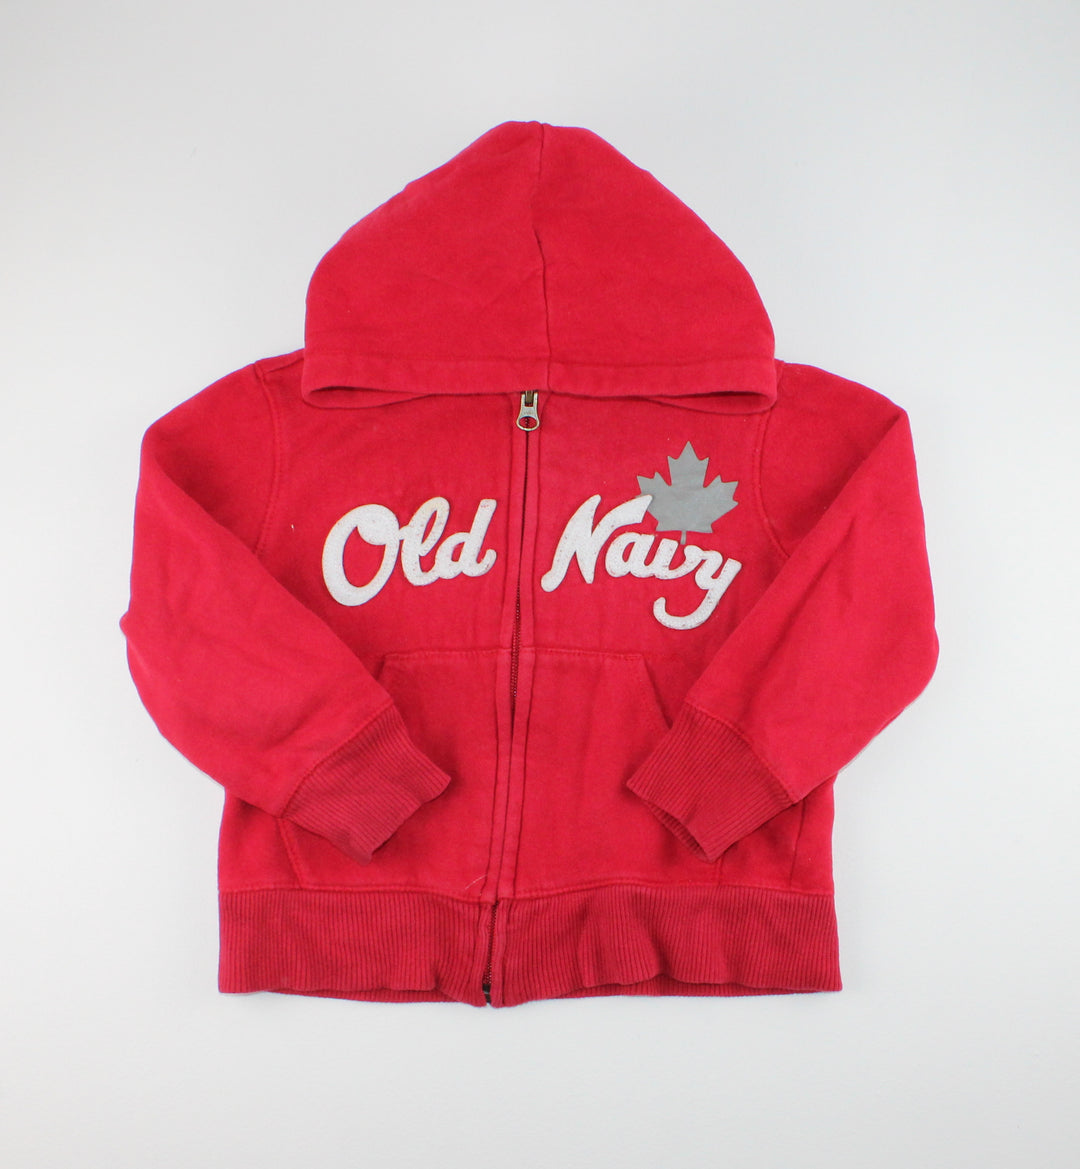 OLD NAVY RED SWEATER 4Y VGUC